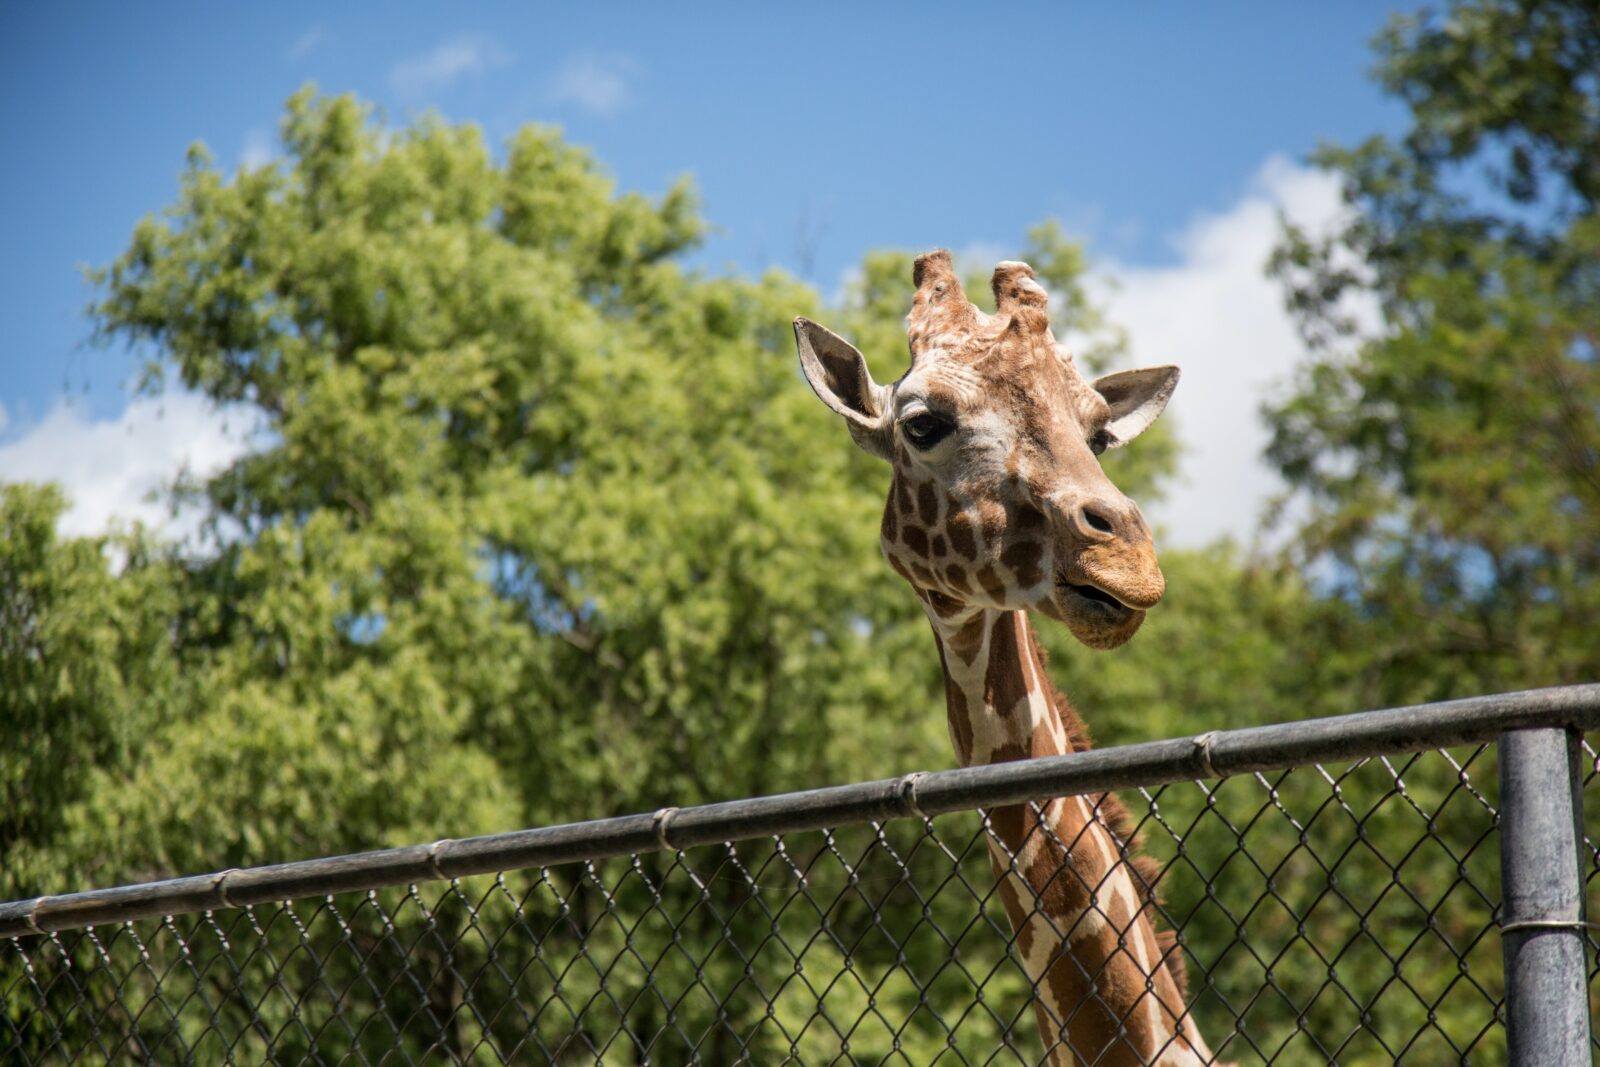 A giraffee looks over the fence.